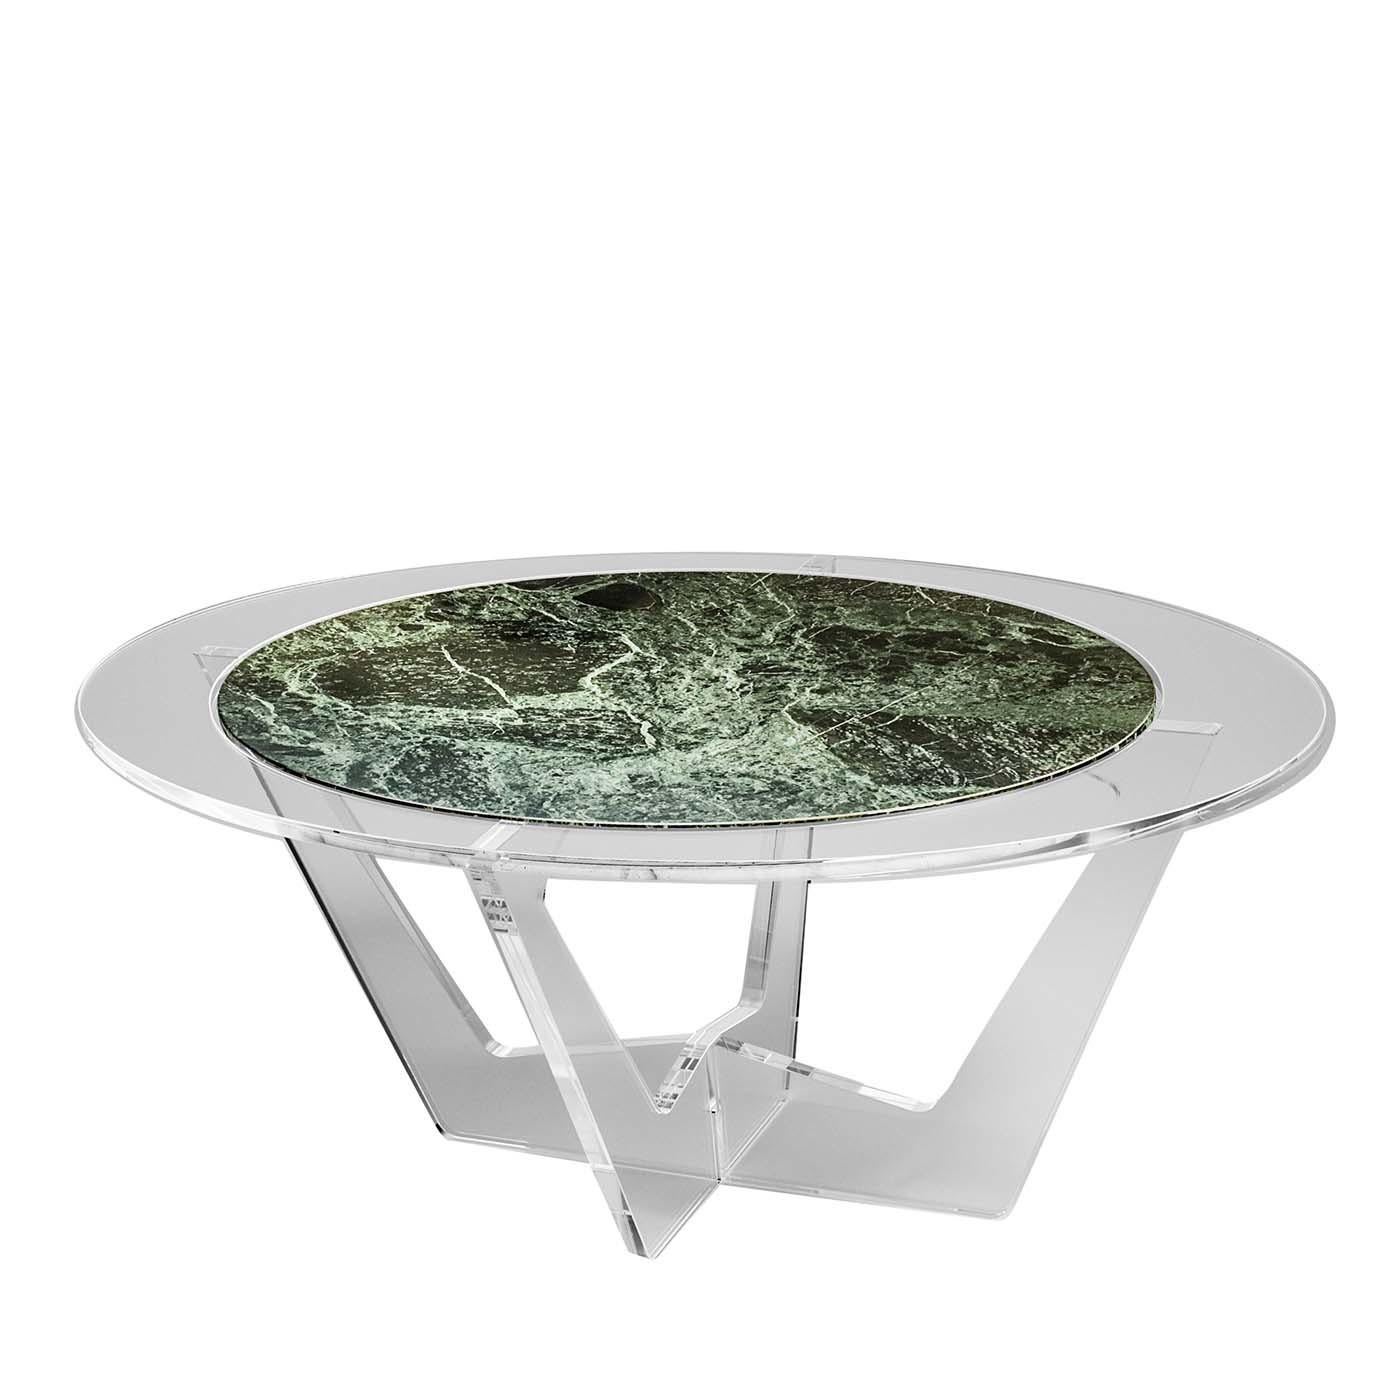 Italian Hac Oval Coffee Table with Green Alps Marble Top by Madea Milano